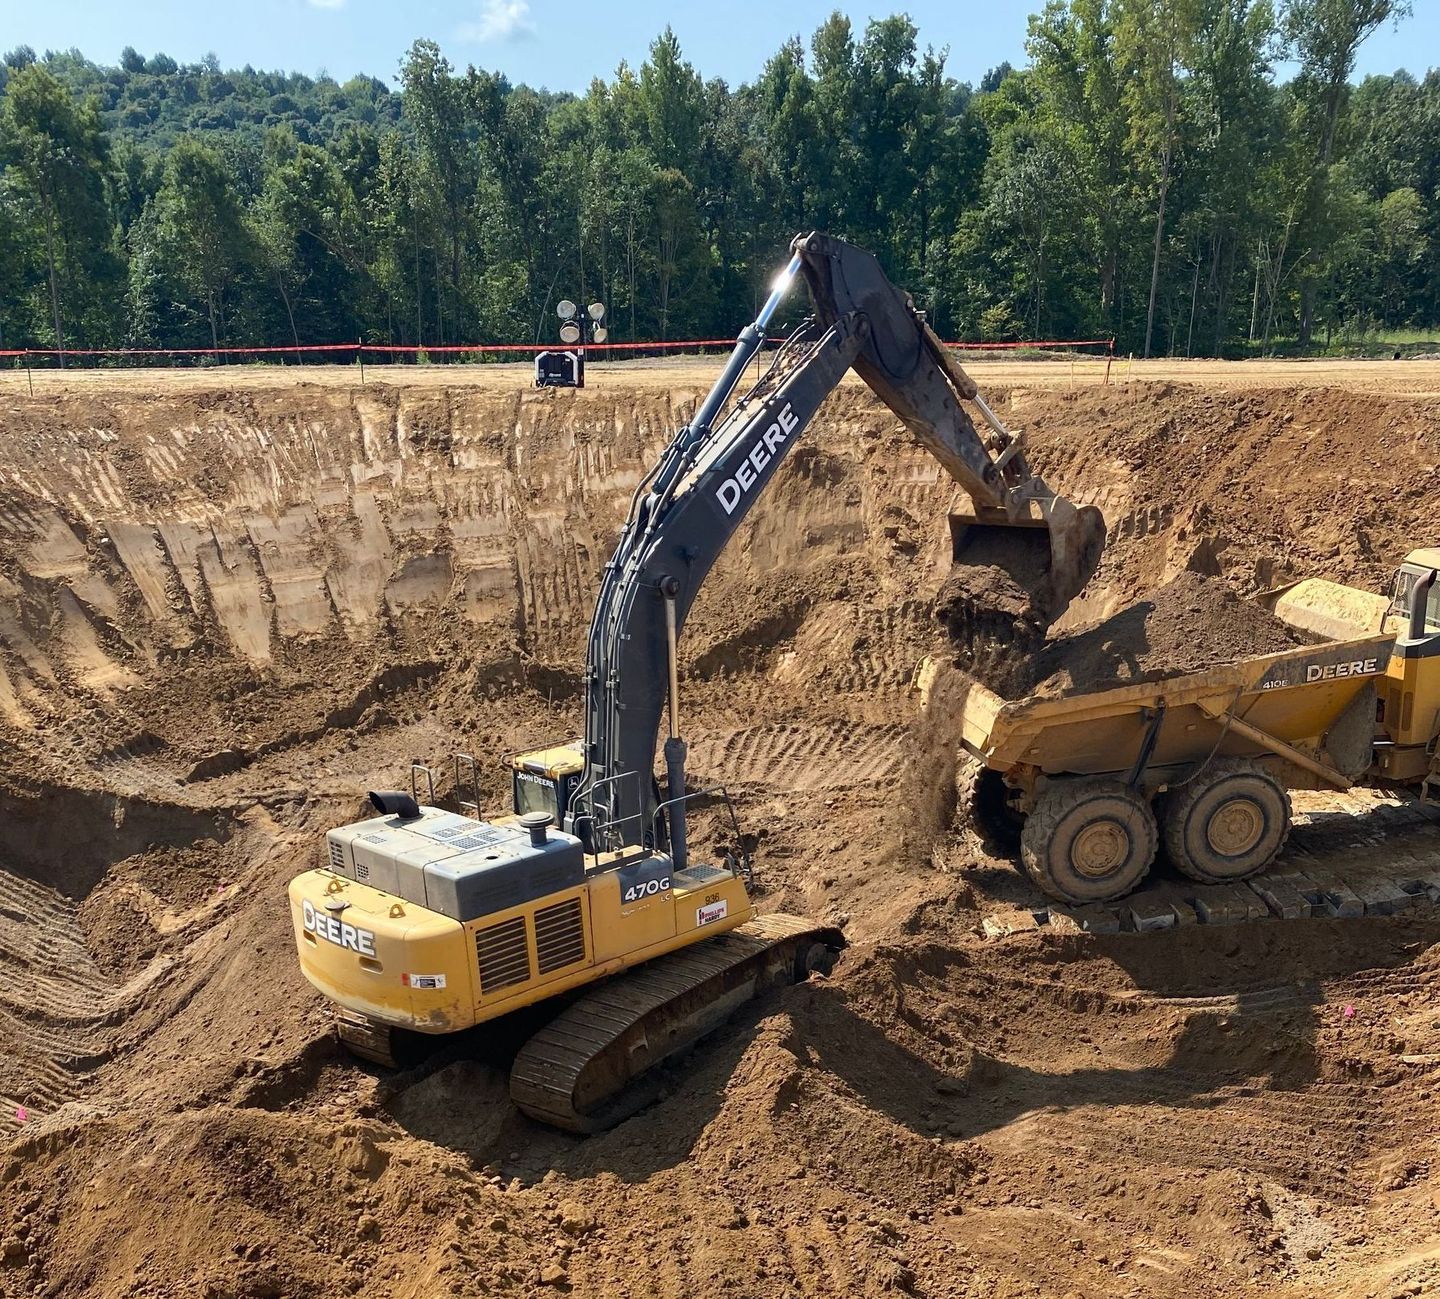 Hardy Holding Group Excavates & Builds for Businesses & Governments in the Midwest.